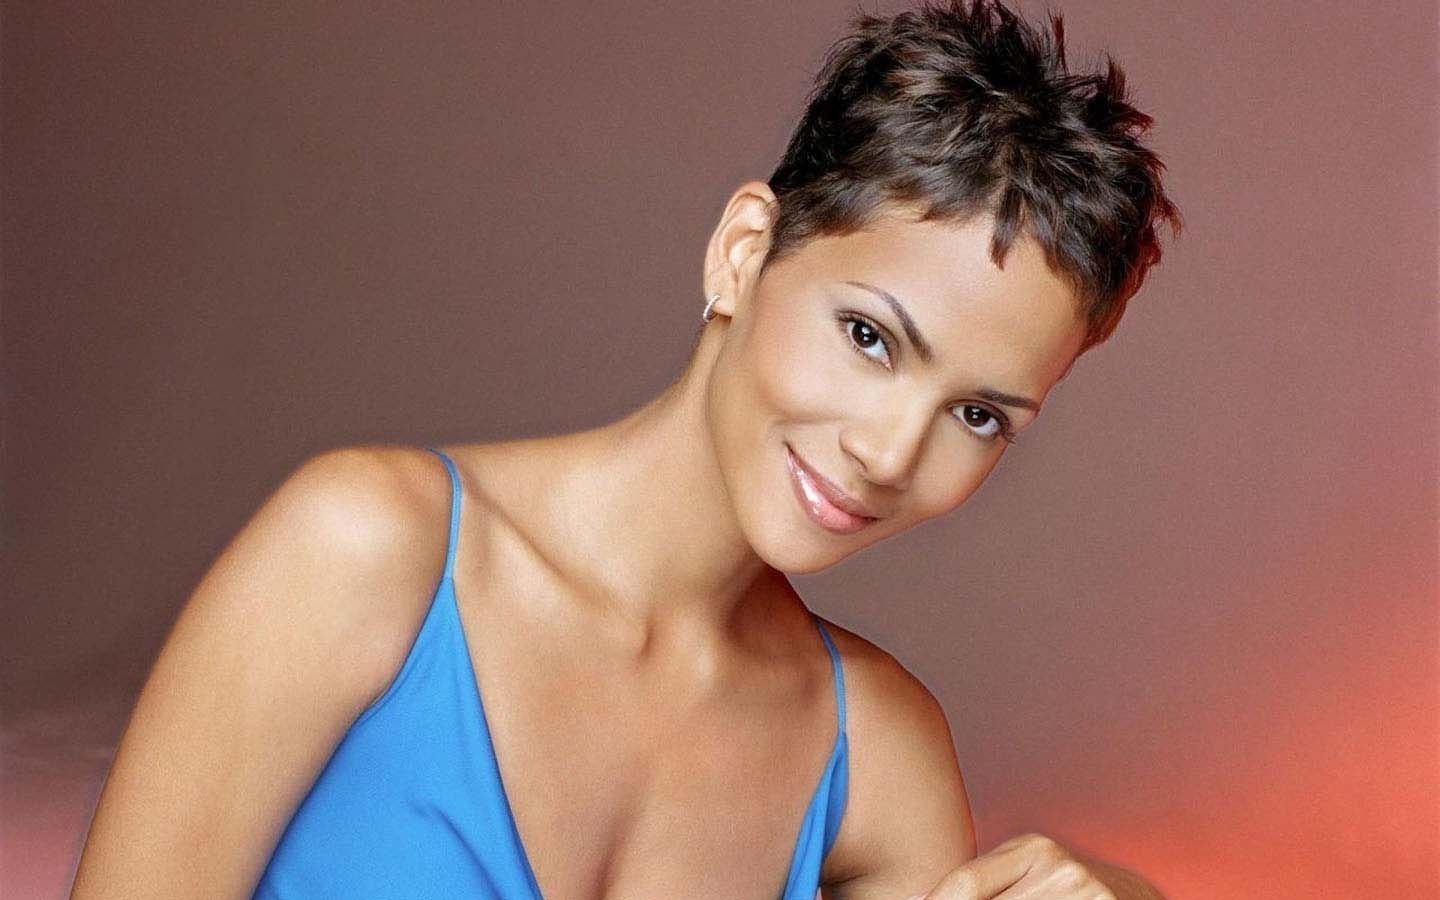 Short Pixie Hairstyles For Black Women Awesome Short Hairstyles Within Newest Short Pixie Hairstyles For Black Women (View 8 of 15)